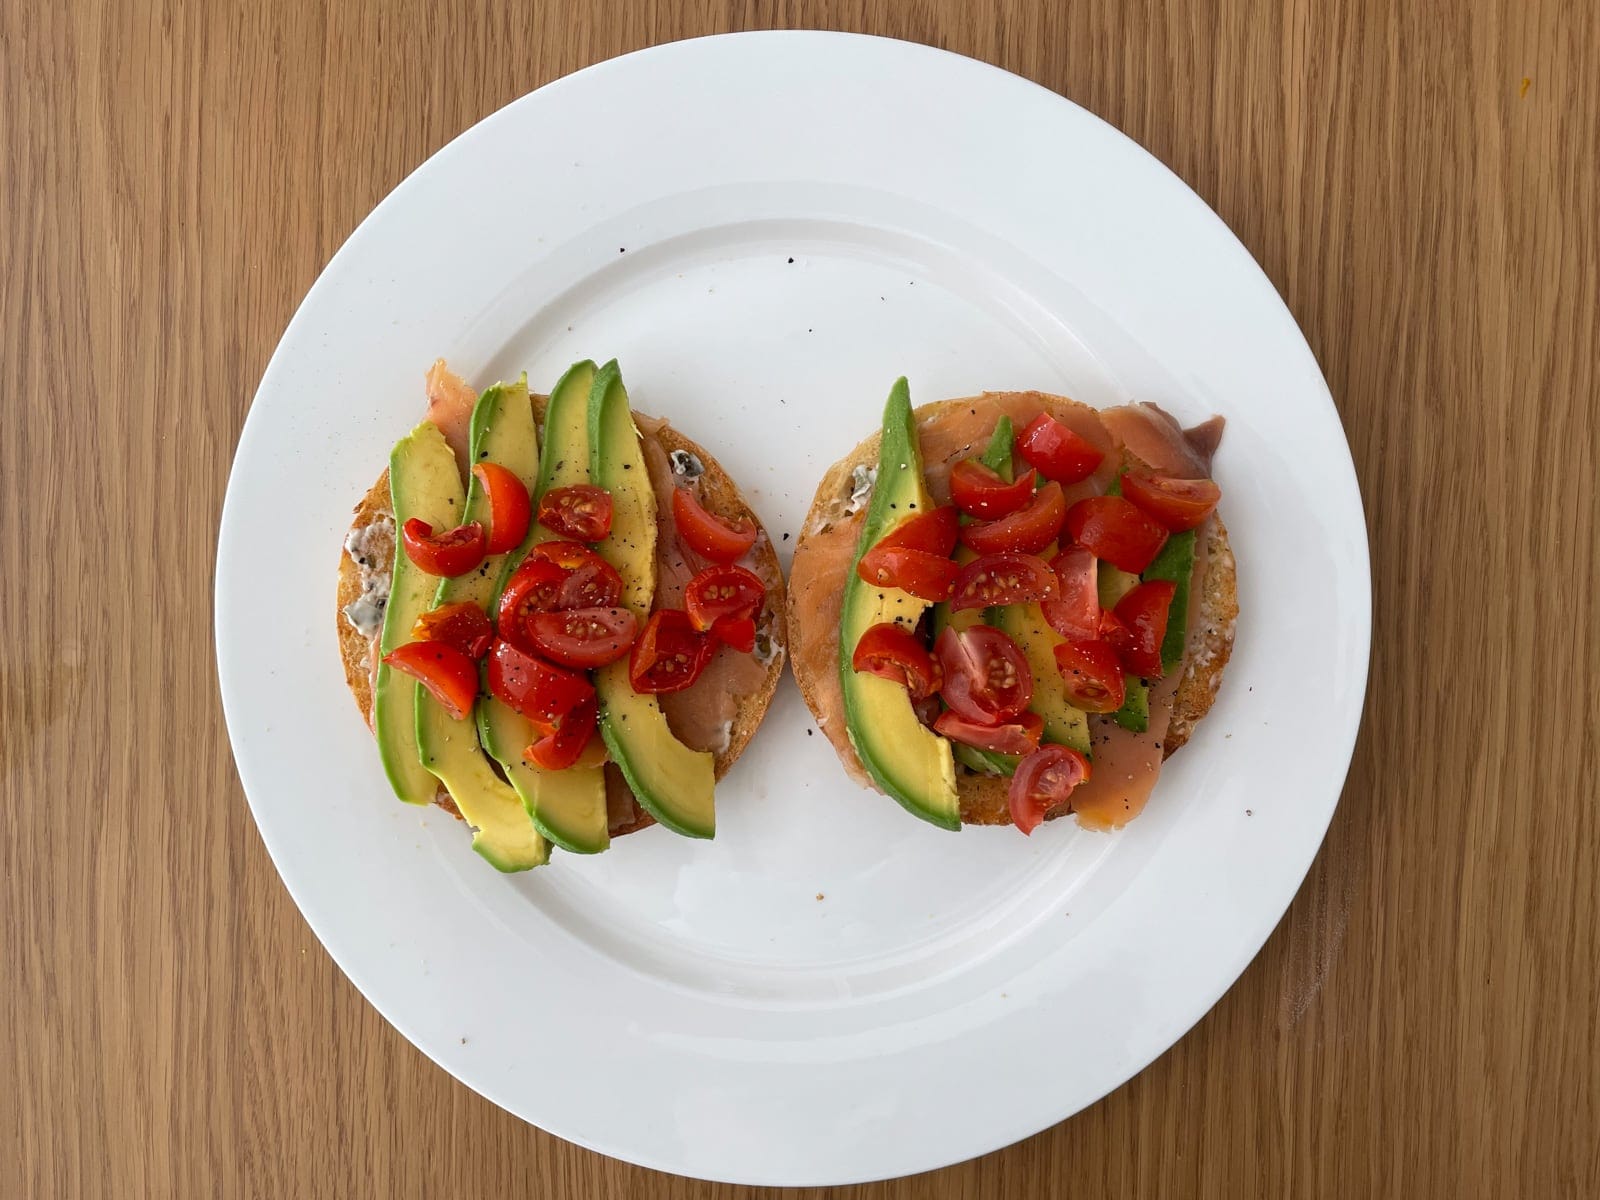 A white plate served with an open bagel of smoked salmon, sliced avocado and wedges of cherry tomatoes